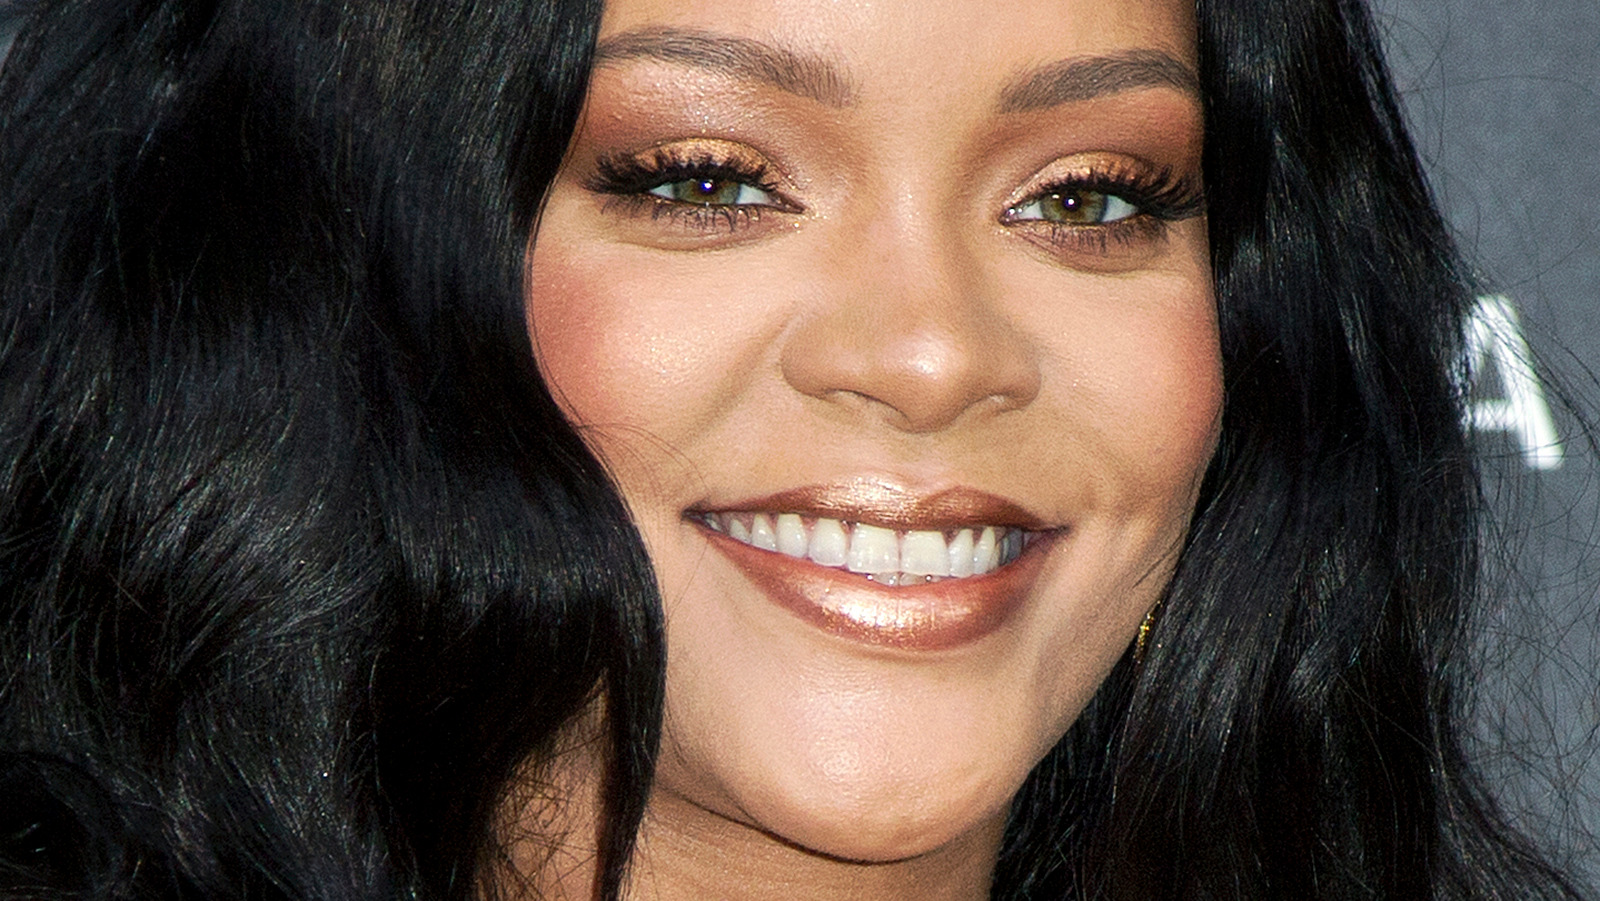 Officially, Rihanna’s last album was six years ago. Fans are rattled.